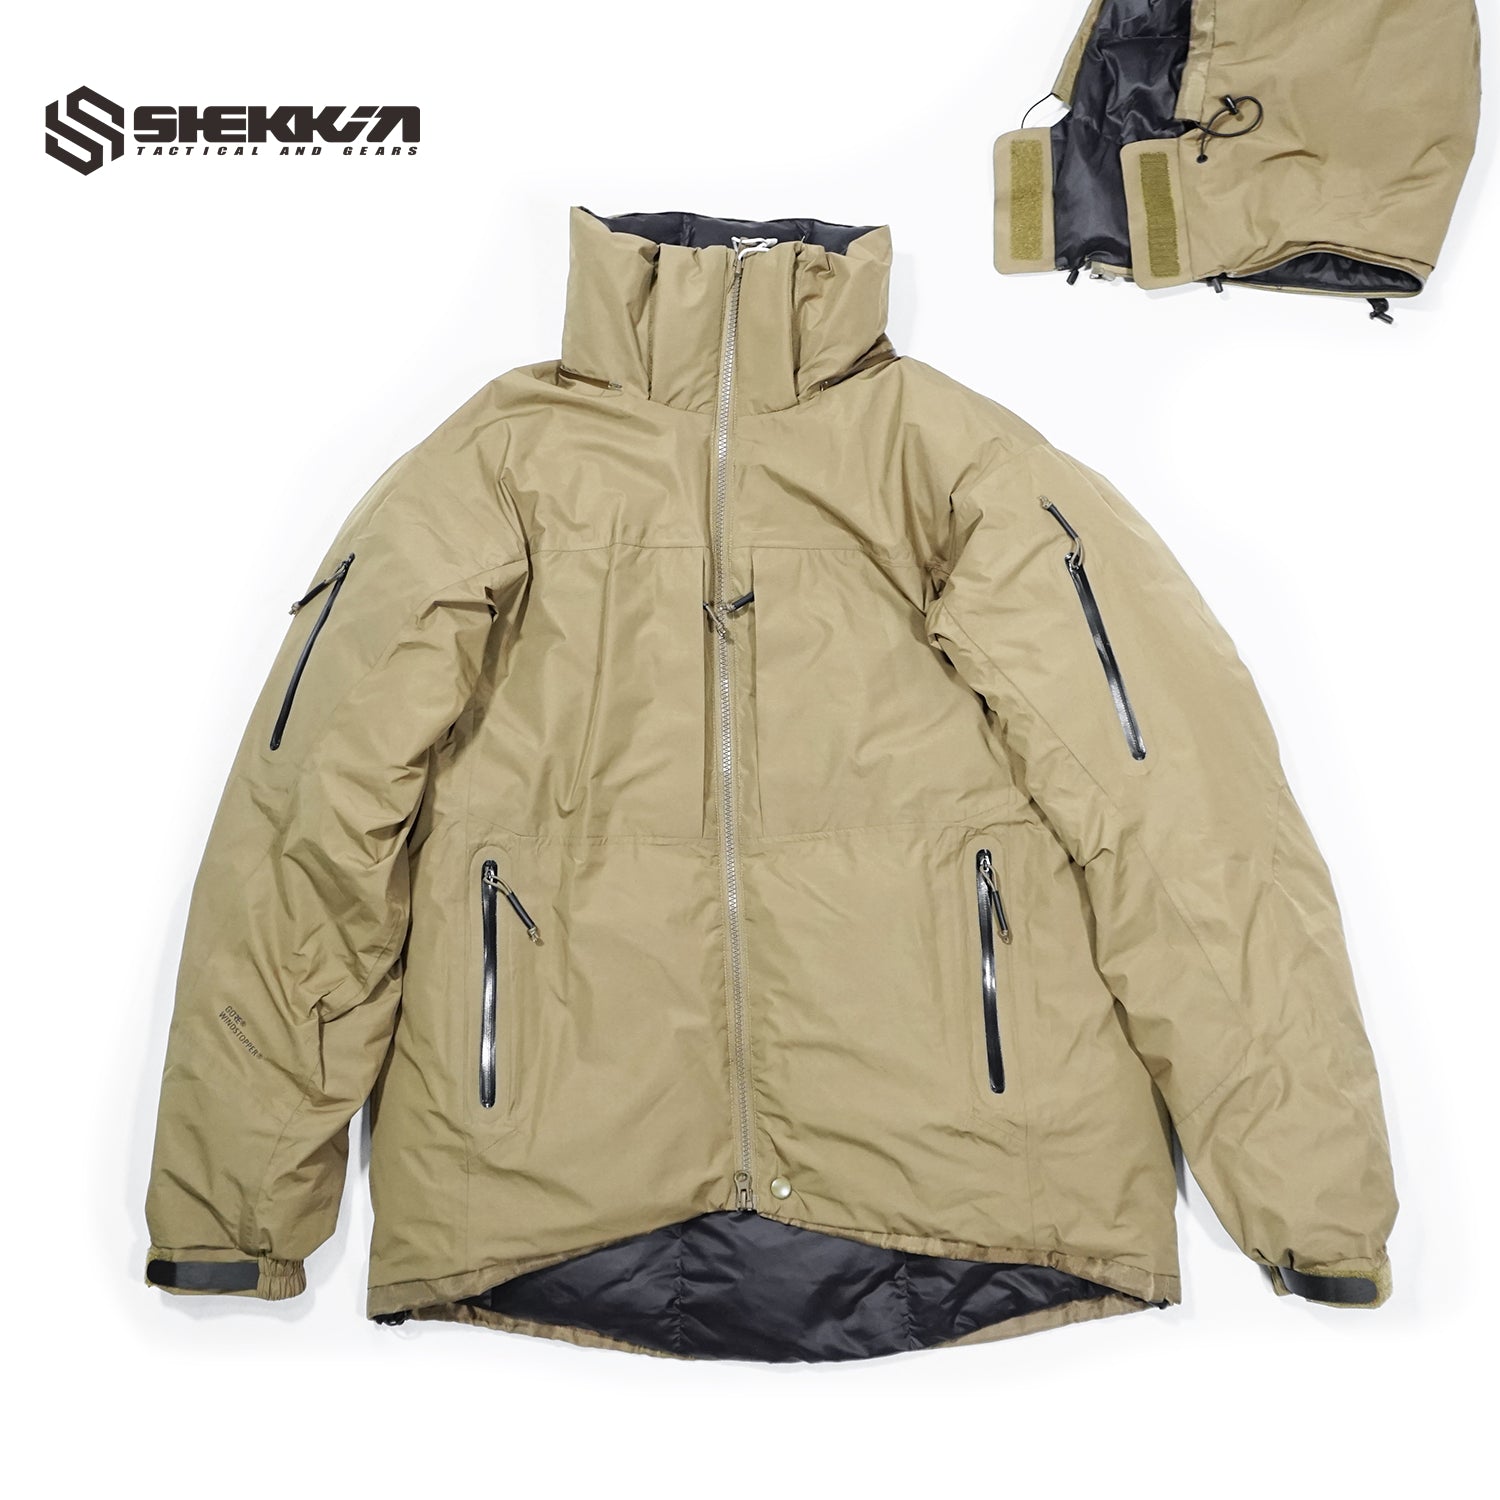 Shekkin Gears COLD LEAF COLD WX Jacket SV down feather filled.